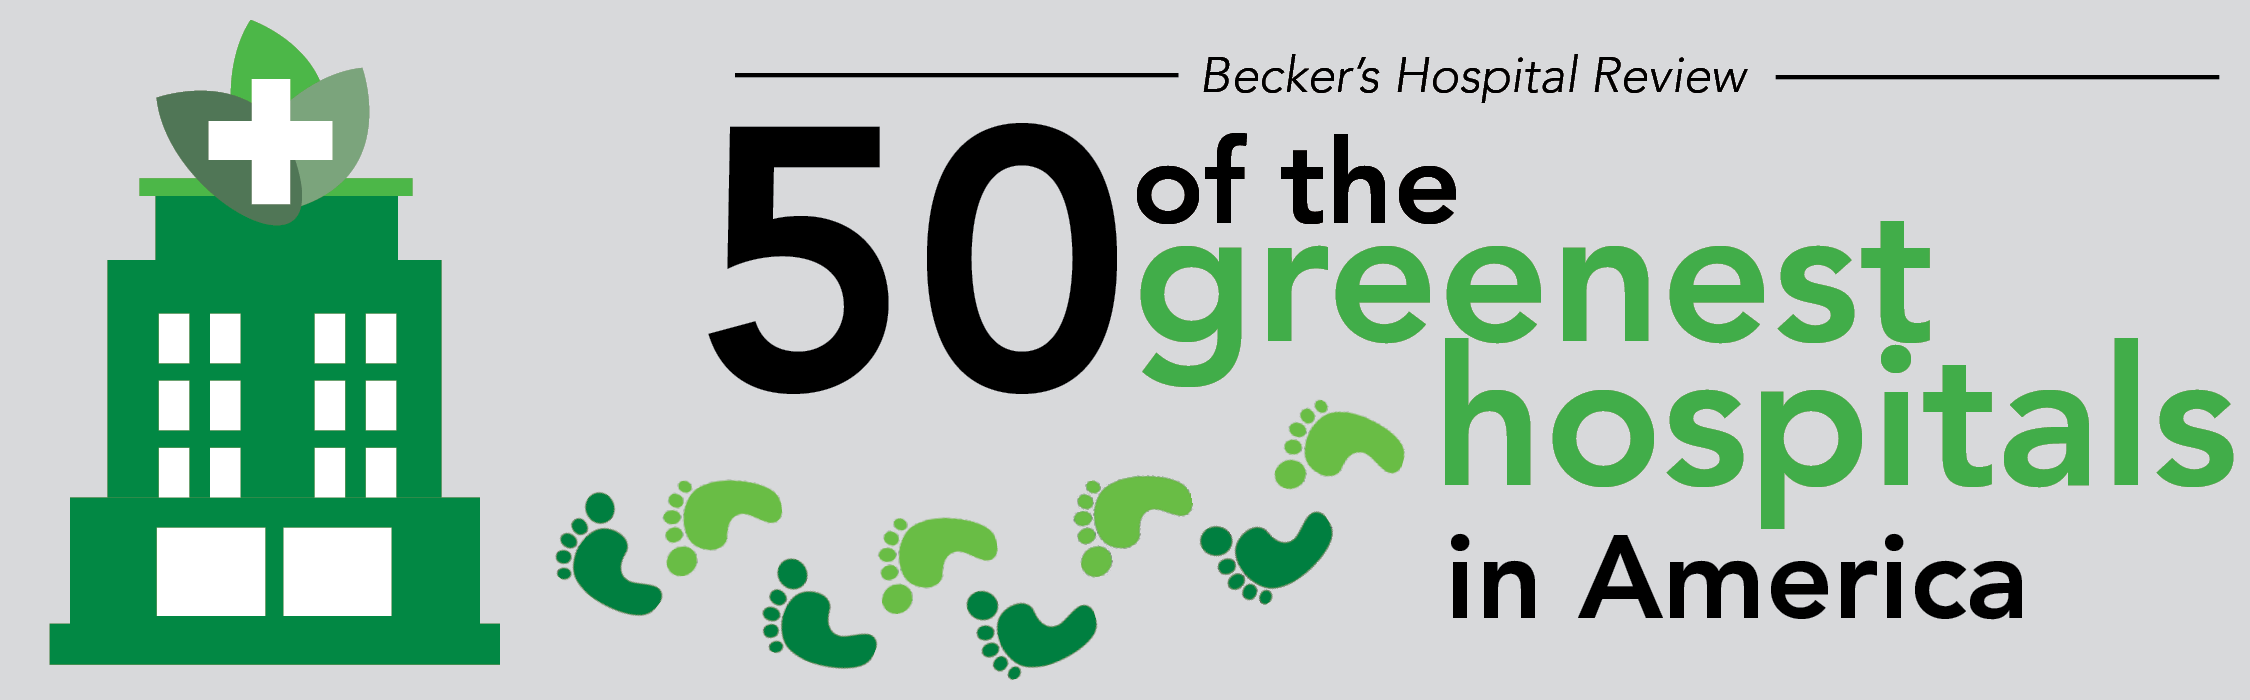 Becker's Hospital Review Logo - Becker's Hospital Review names 50 of the greenest hospitals in ...